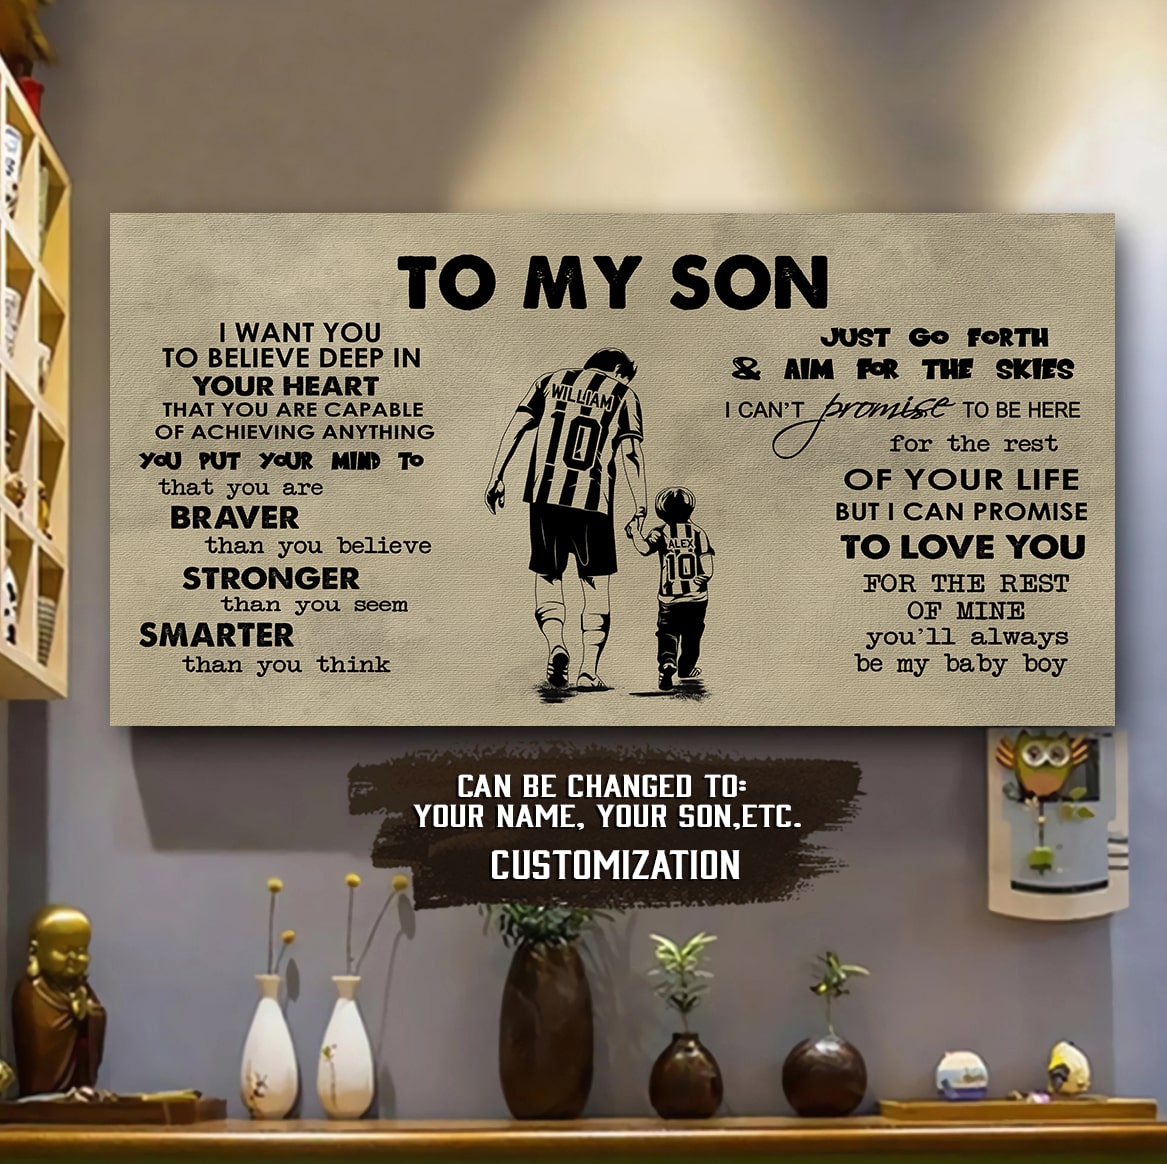 BASEBALL TO MY SON- I WANT YOU TO BELIEVE- CANVAS POSTER